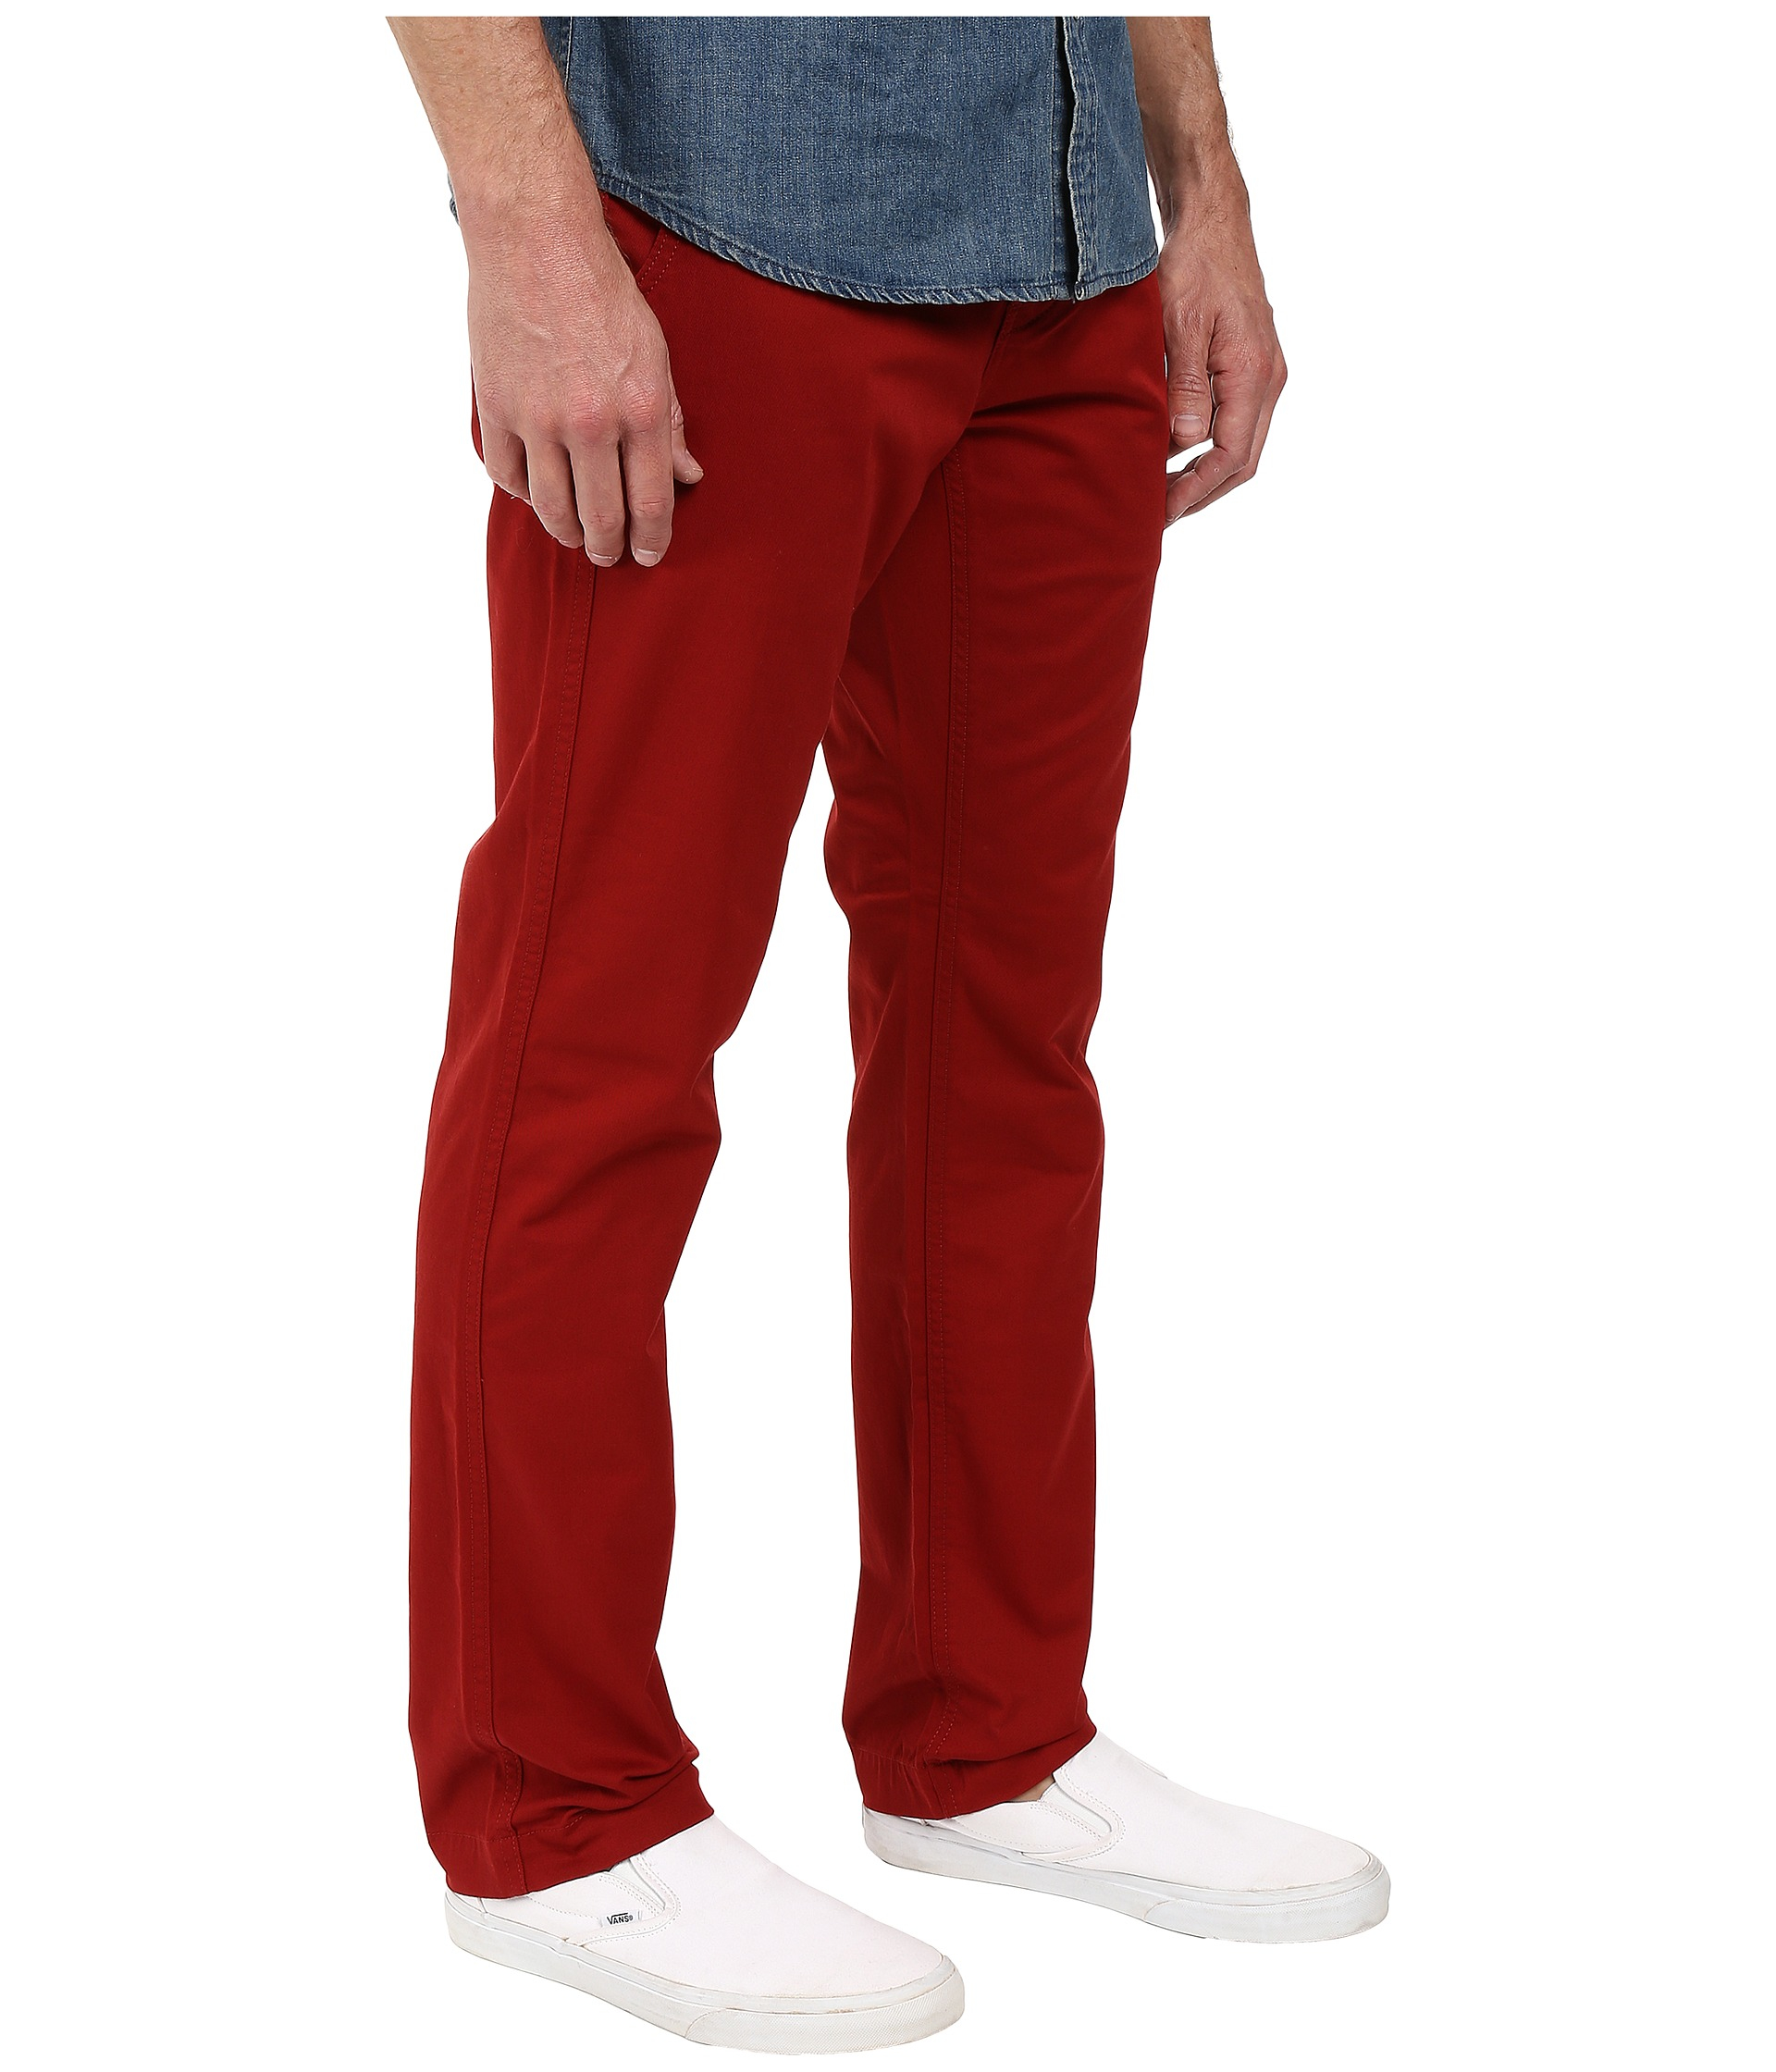 541 athletic fit chino